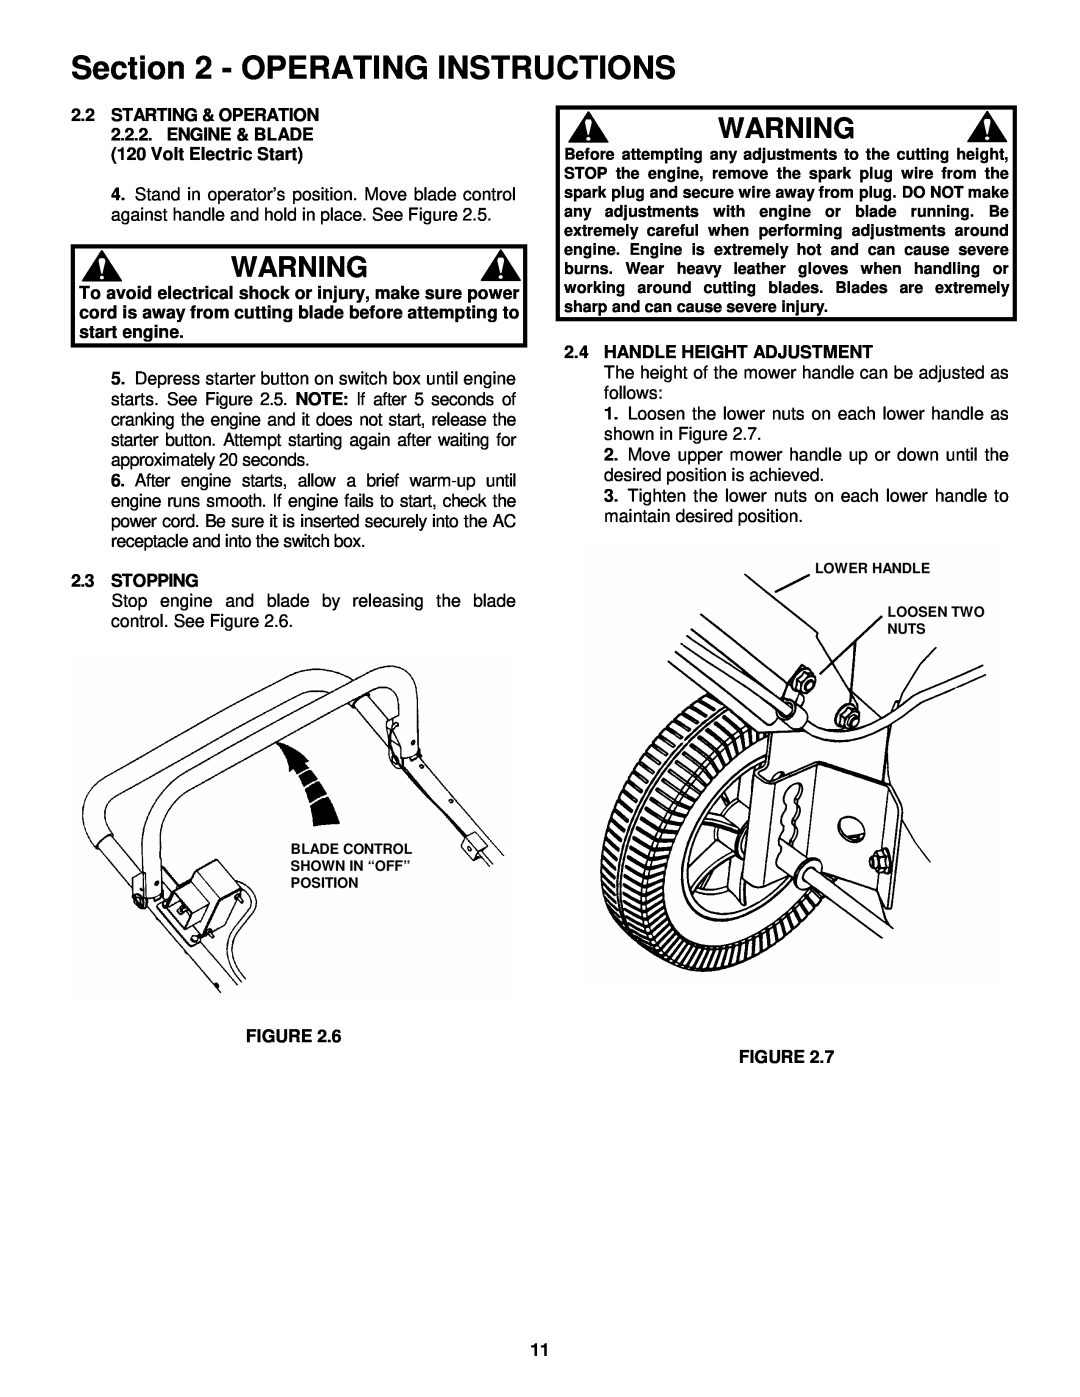 Snapper R204513E Operating Instructions, Stop engine and blade by releasing the blade control. See Figure 